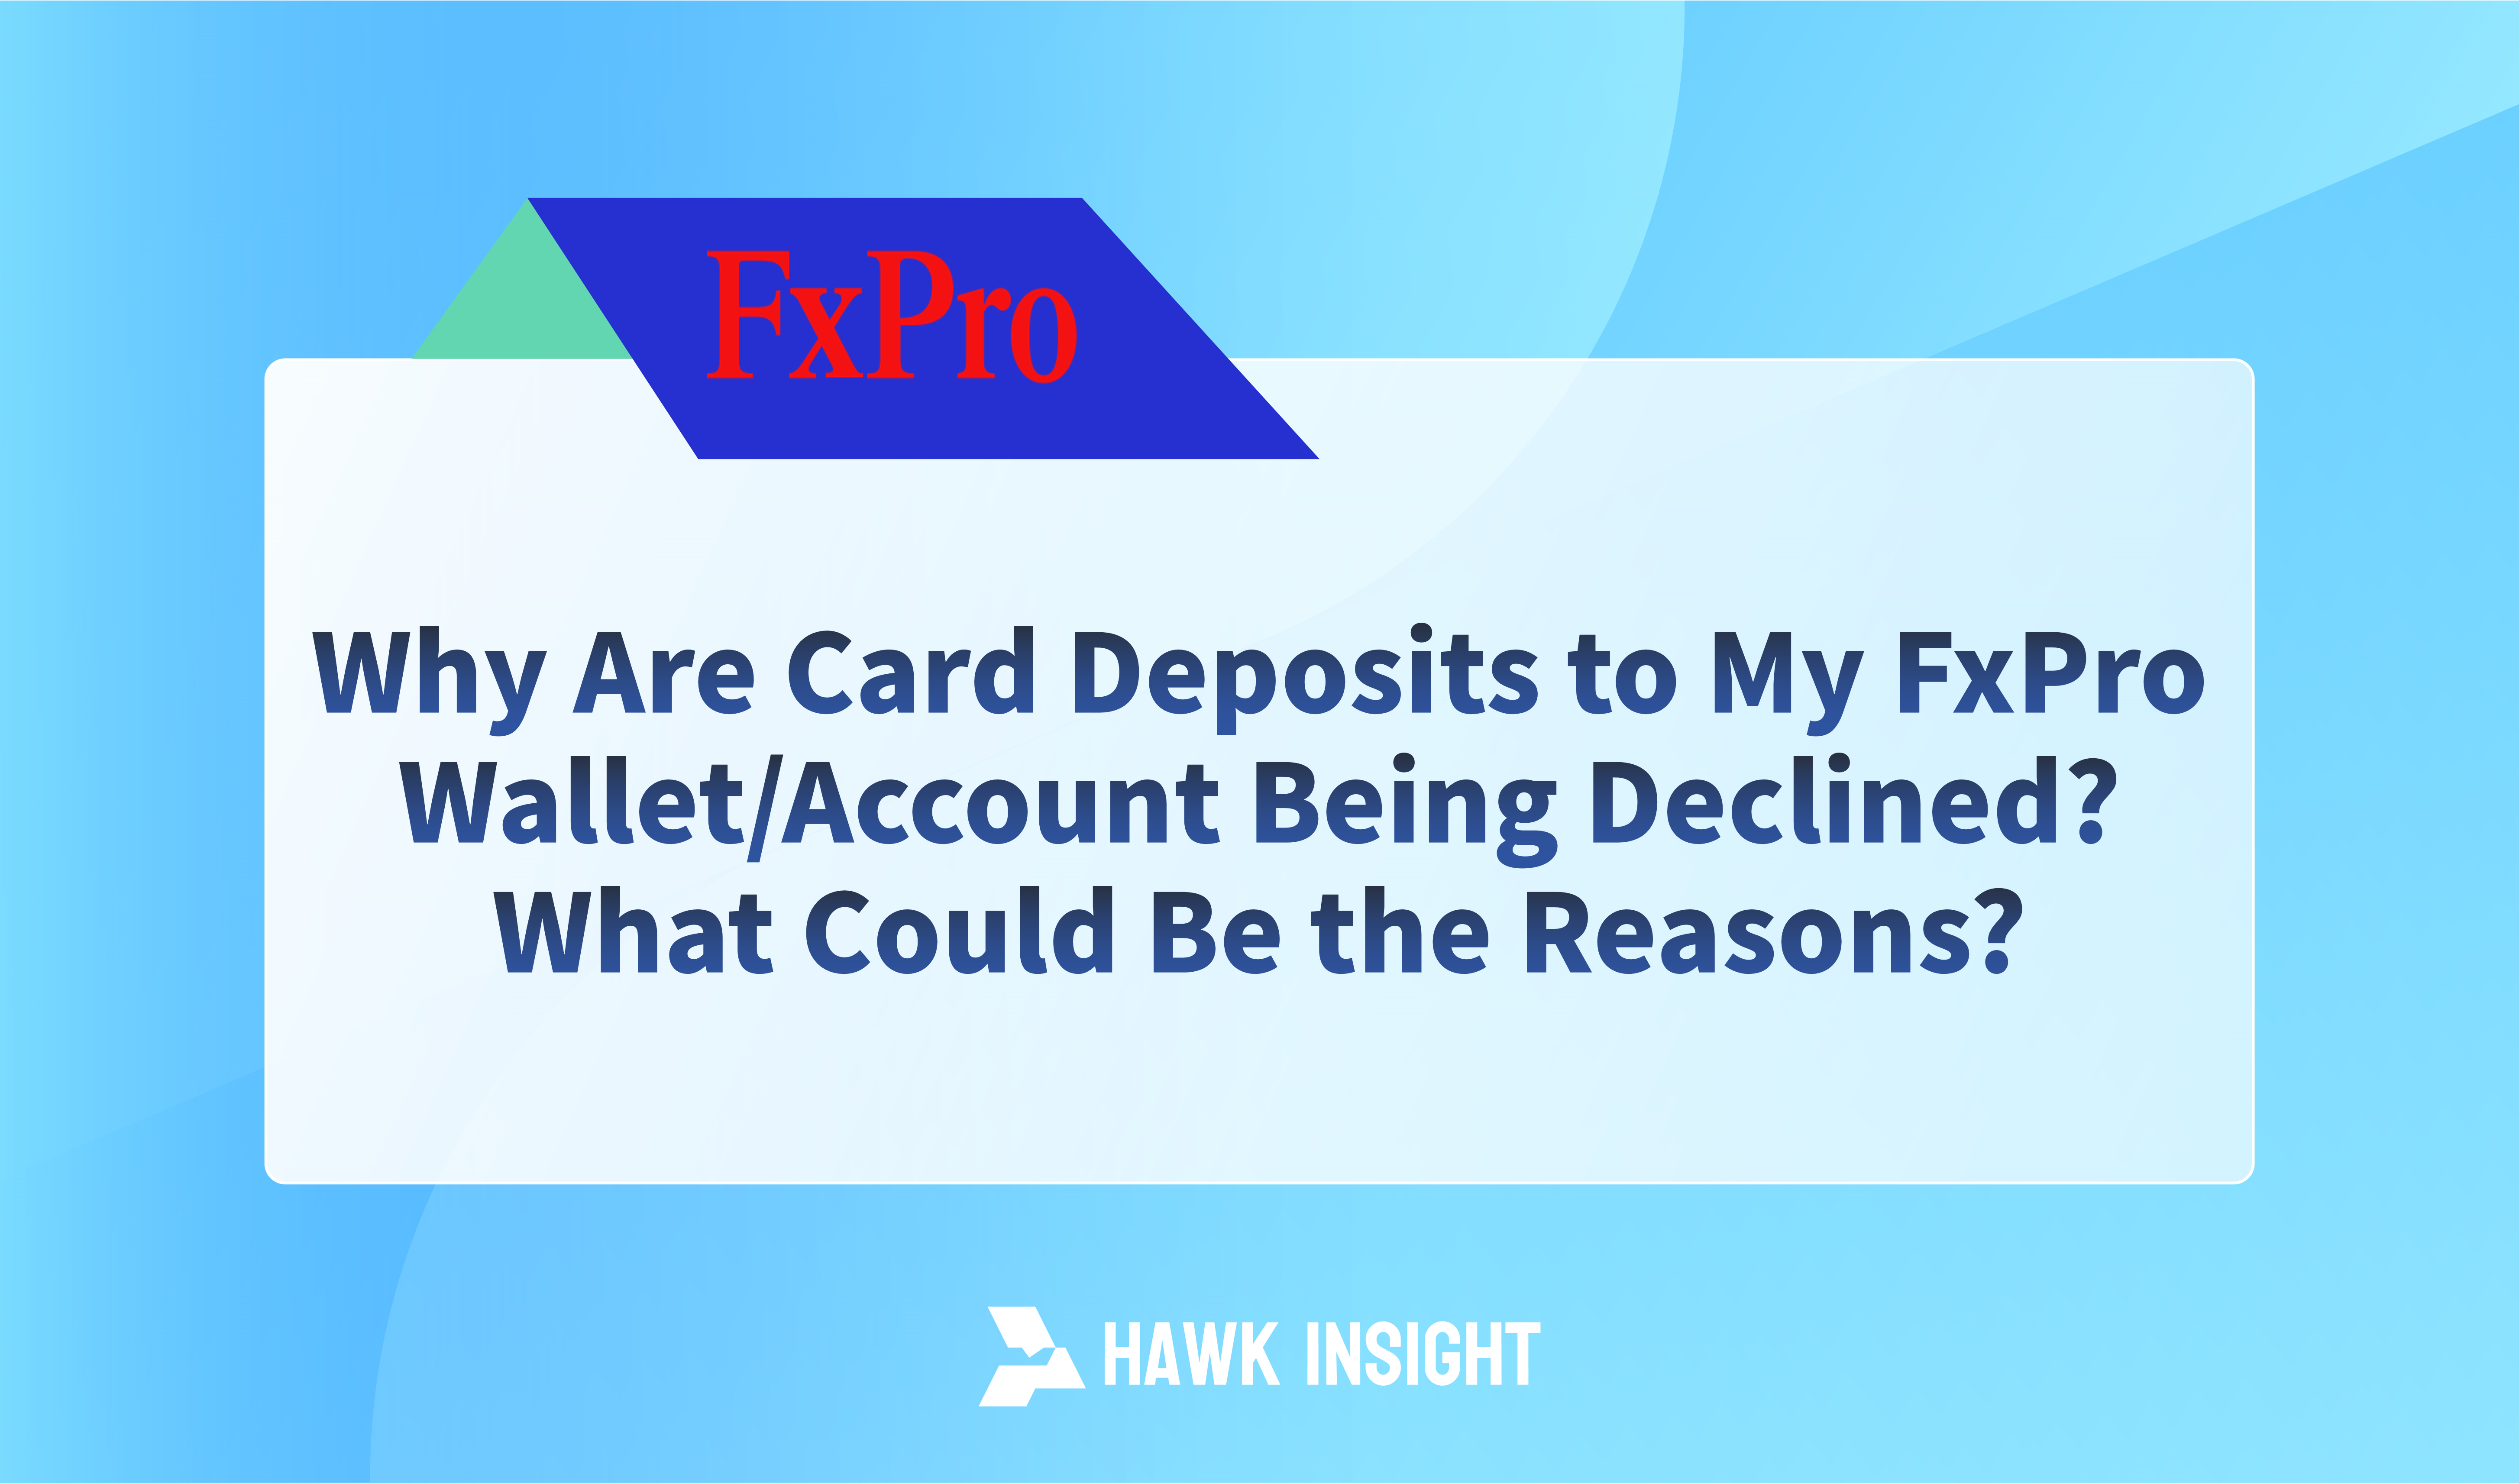 Why Are Card Deposits to My FxPro Wallet/Account Being Declined?